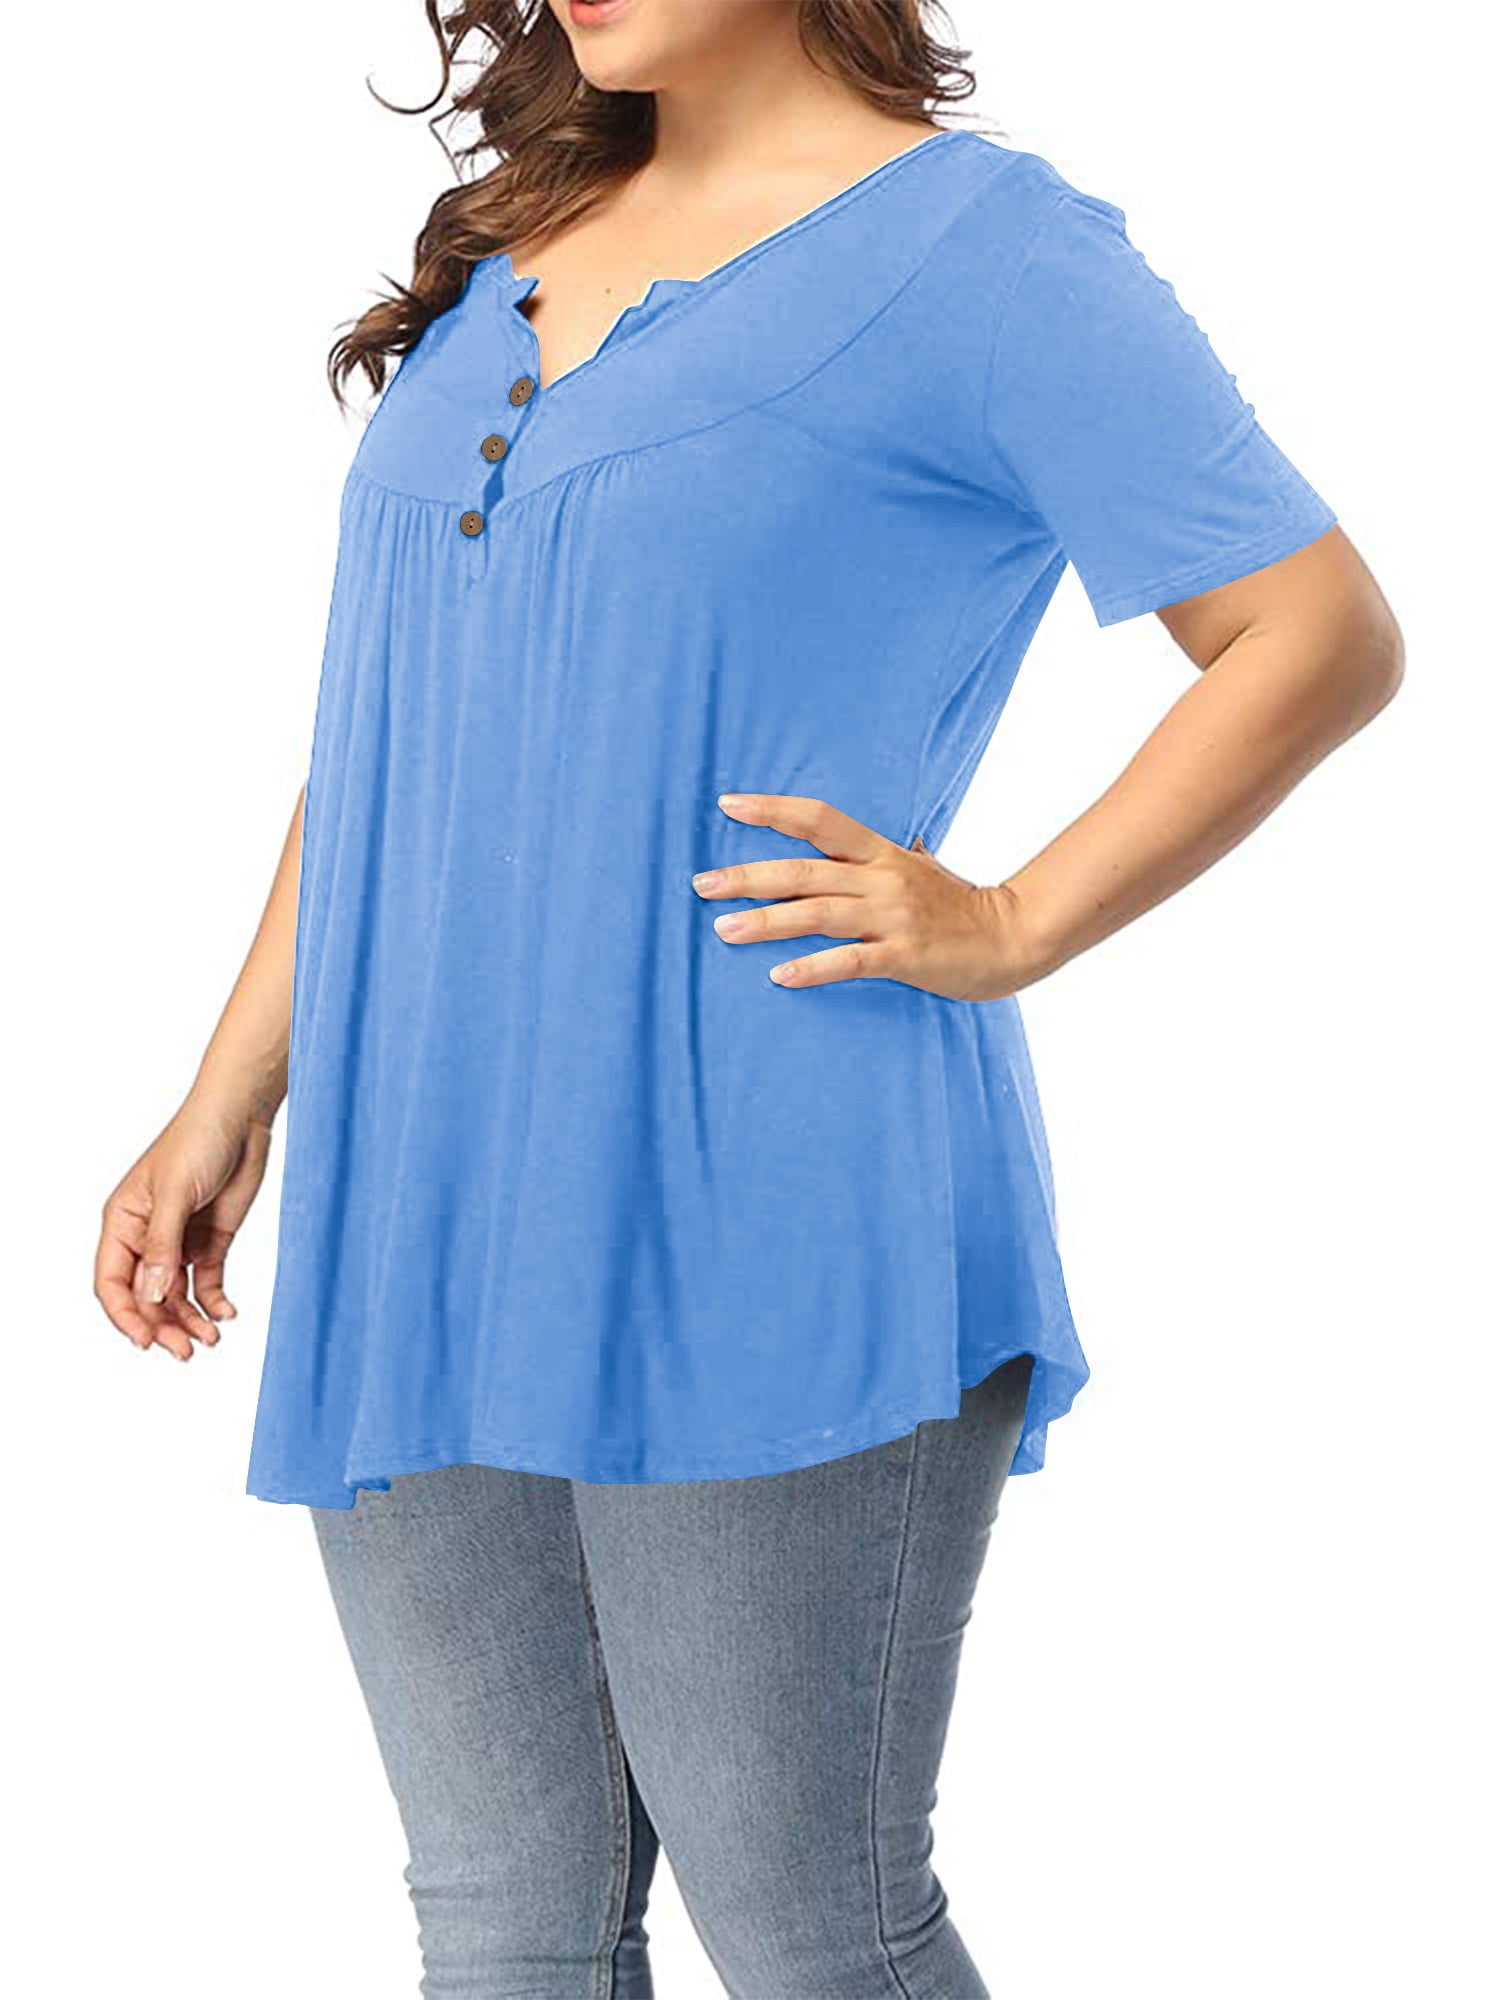 Gboomo Women's Plus Size Henley Shirts Button Up Plus Size Blouses Short Sleeve Pleated Tunic Tops 